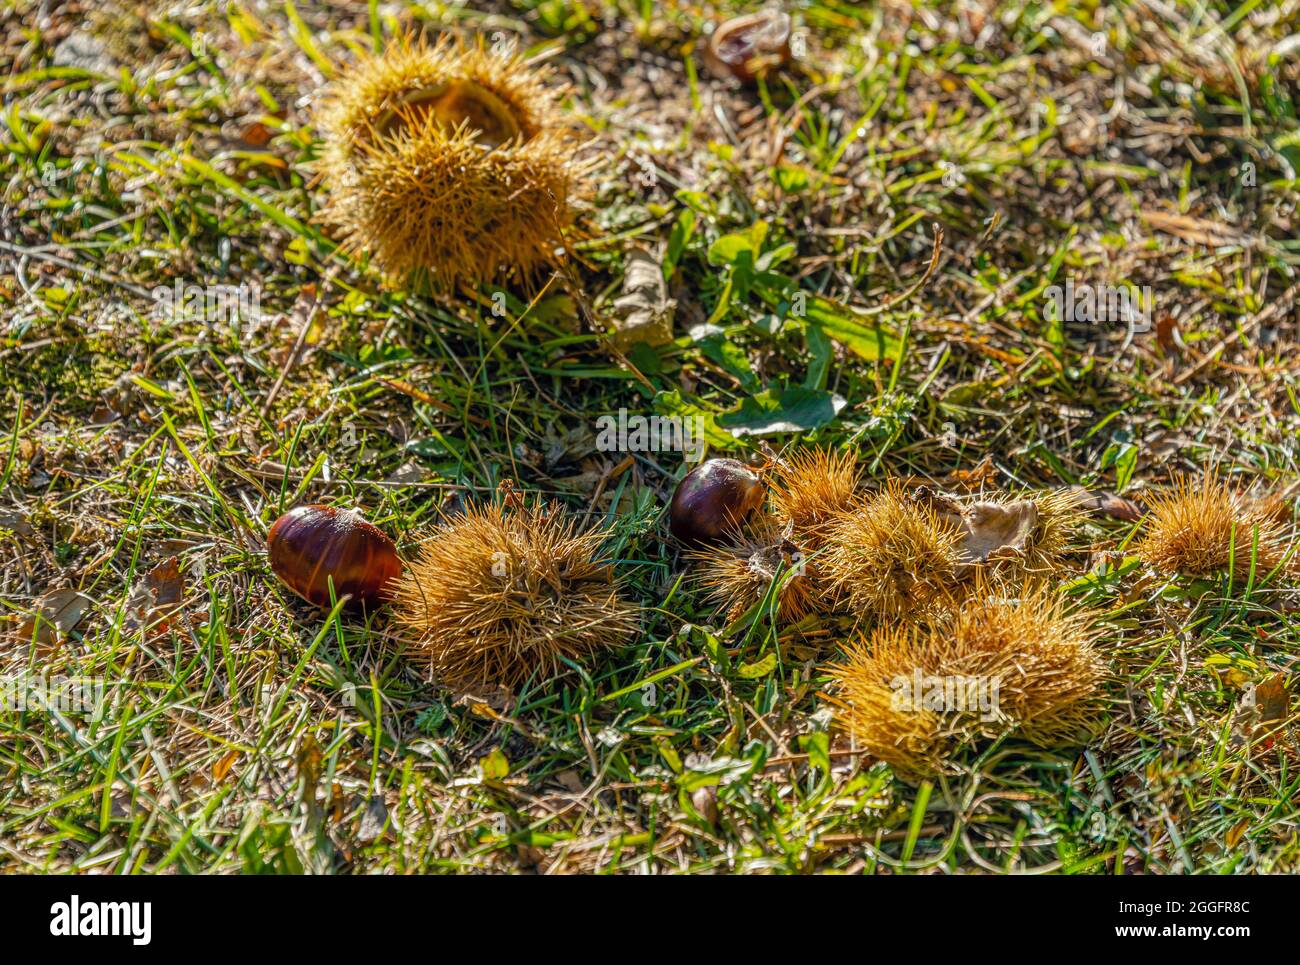 Schalen High Resolution Stock Photography and Images - Alamy